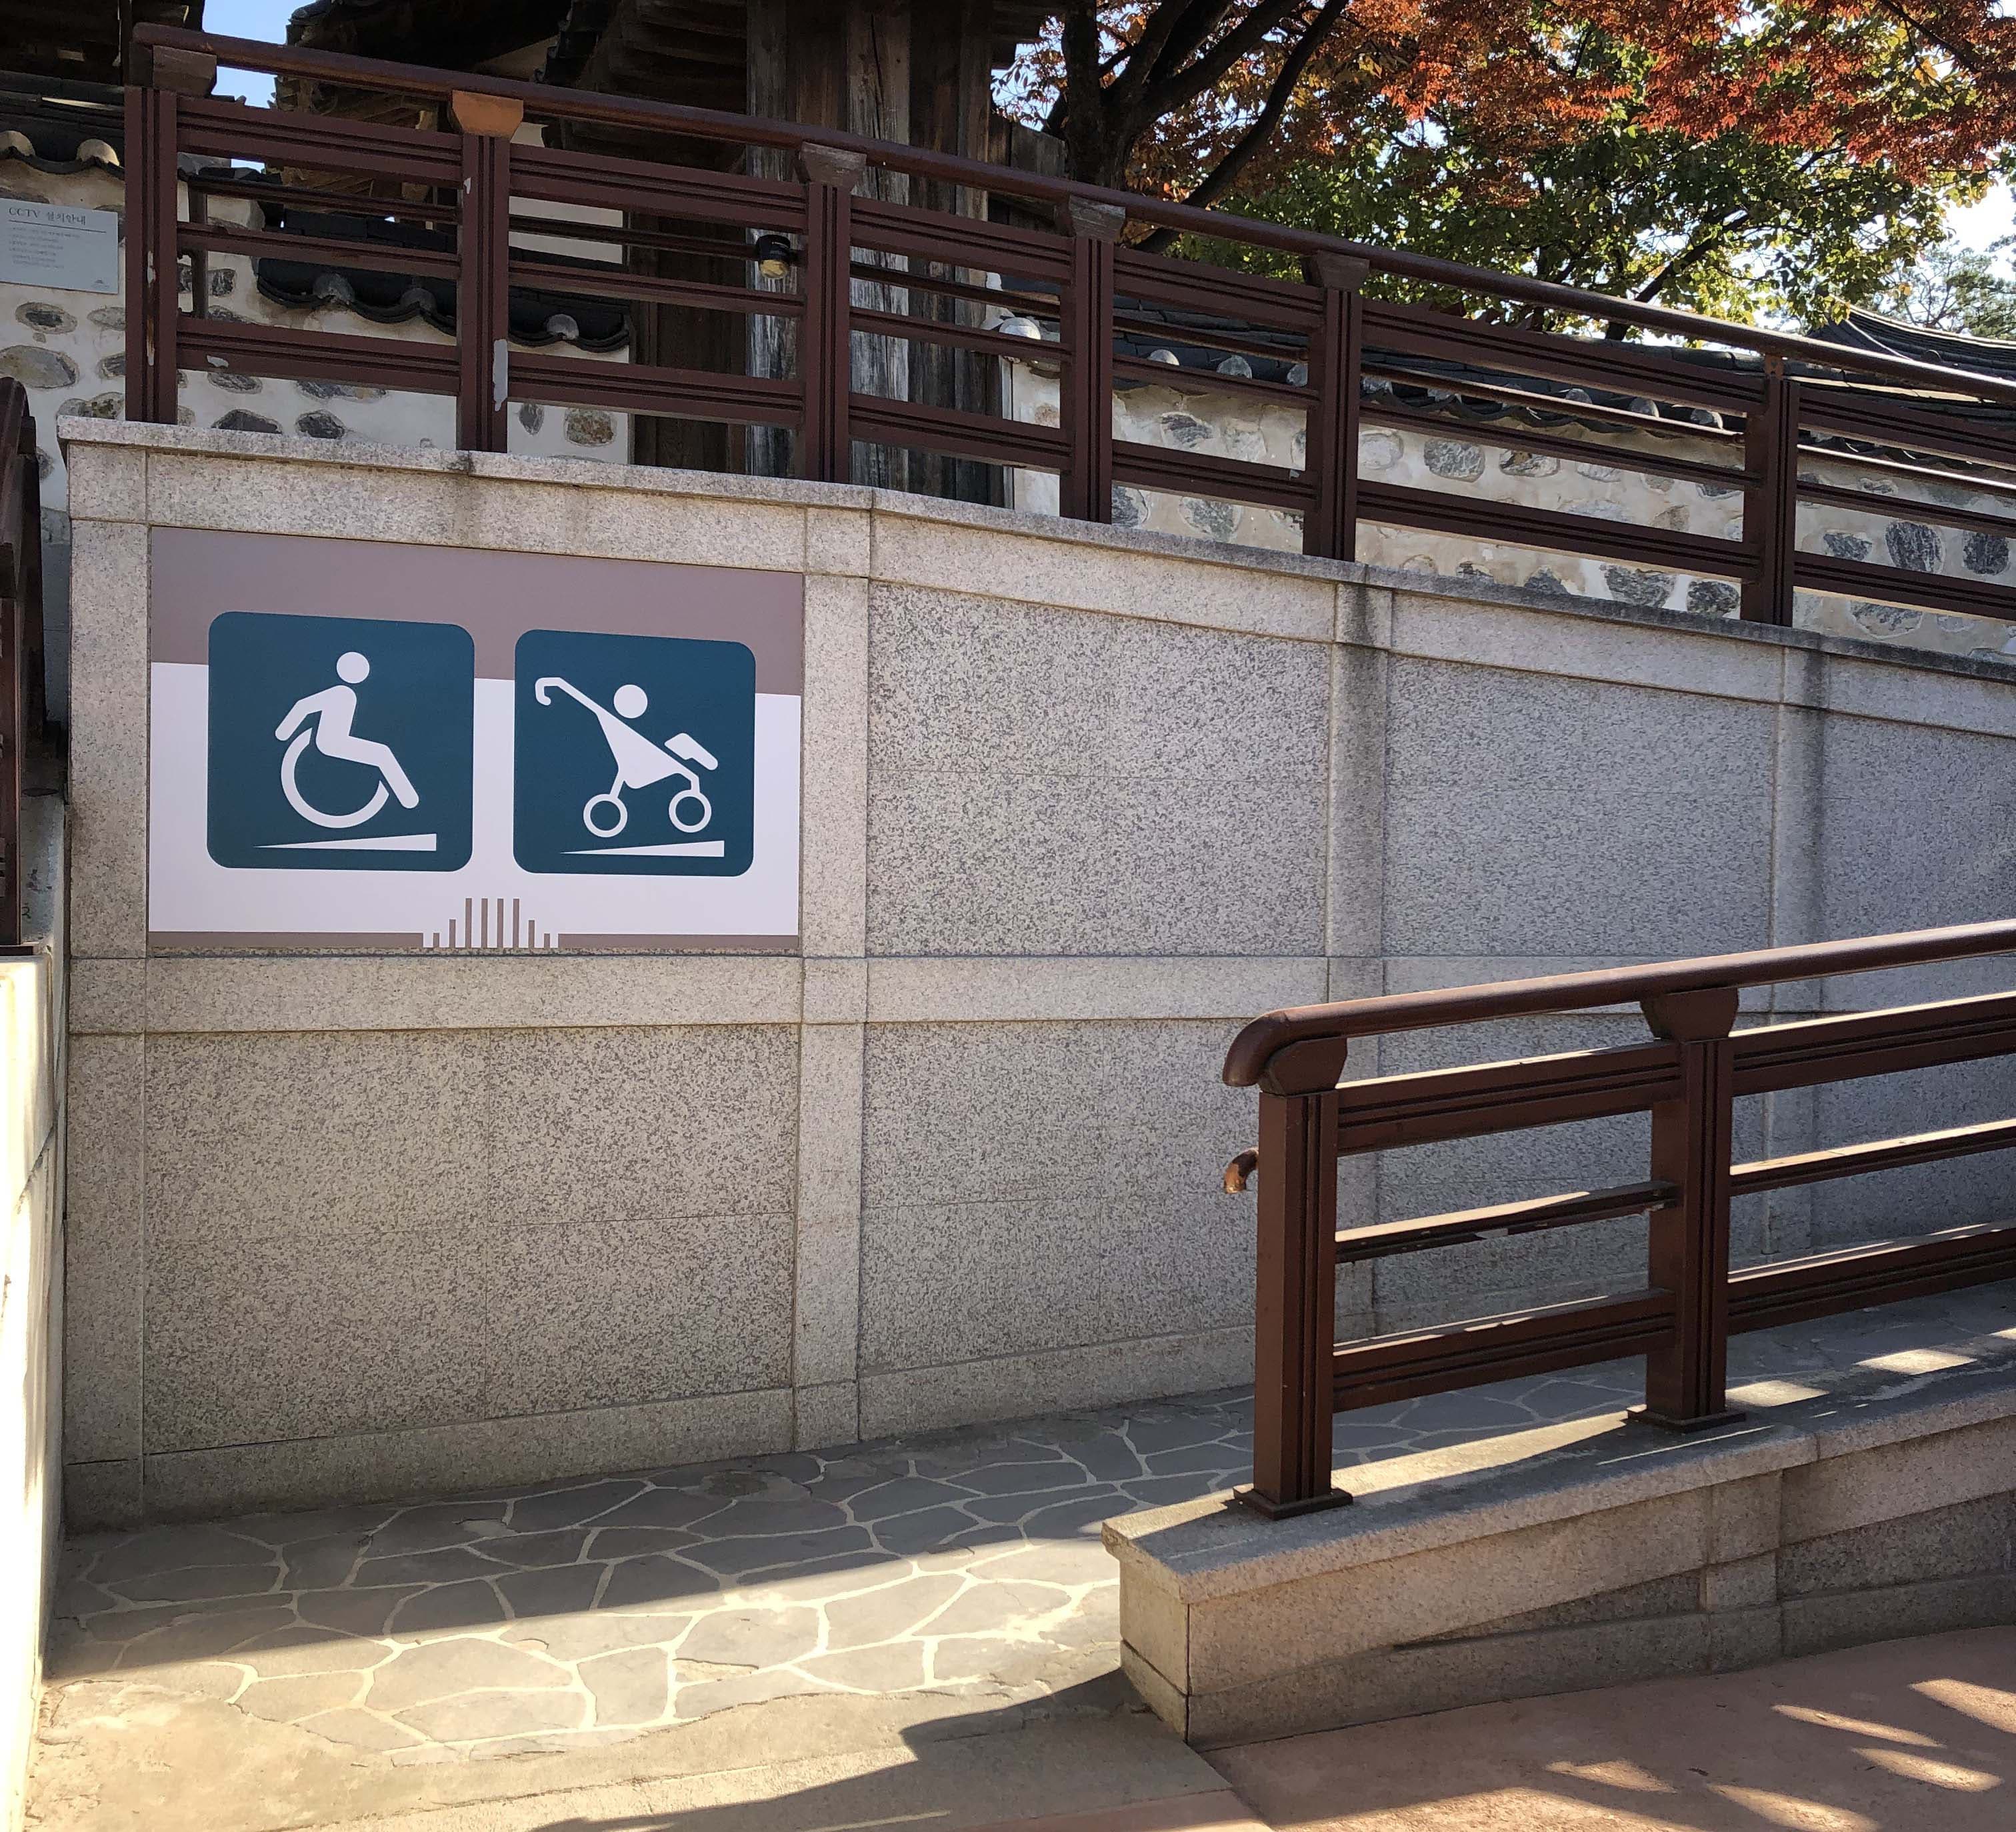 Movement route0 : Wheelchair and stroller moving path information board installed on a ramp